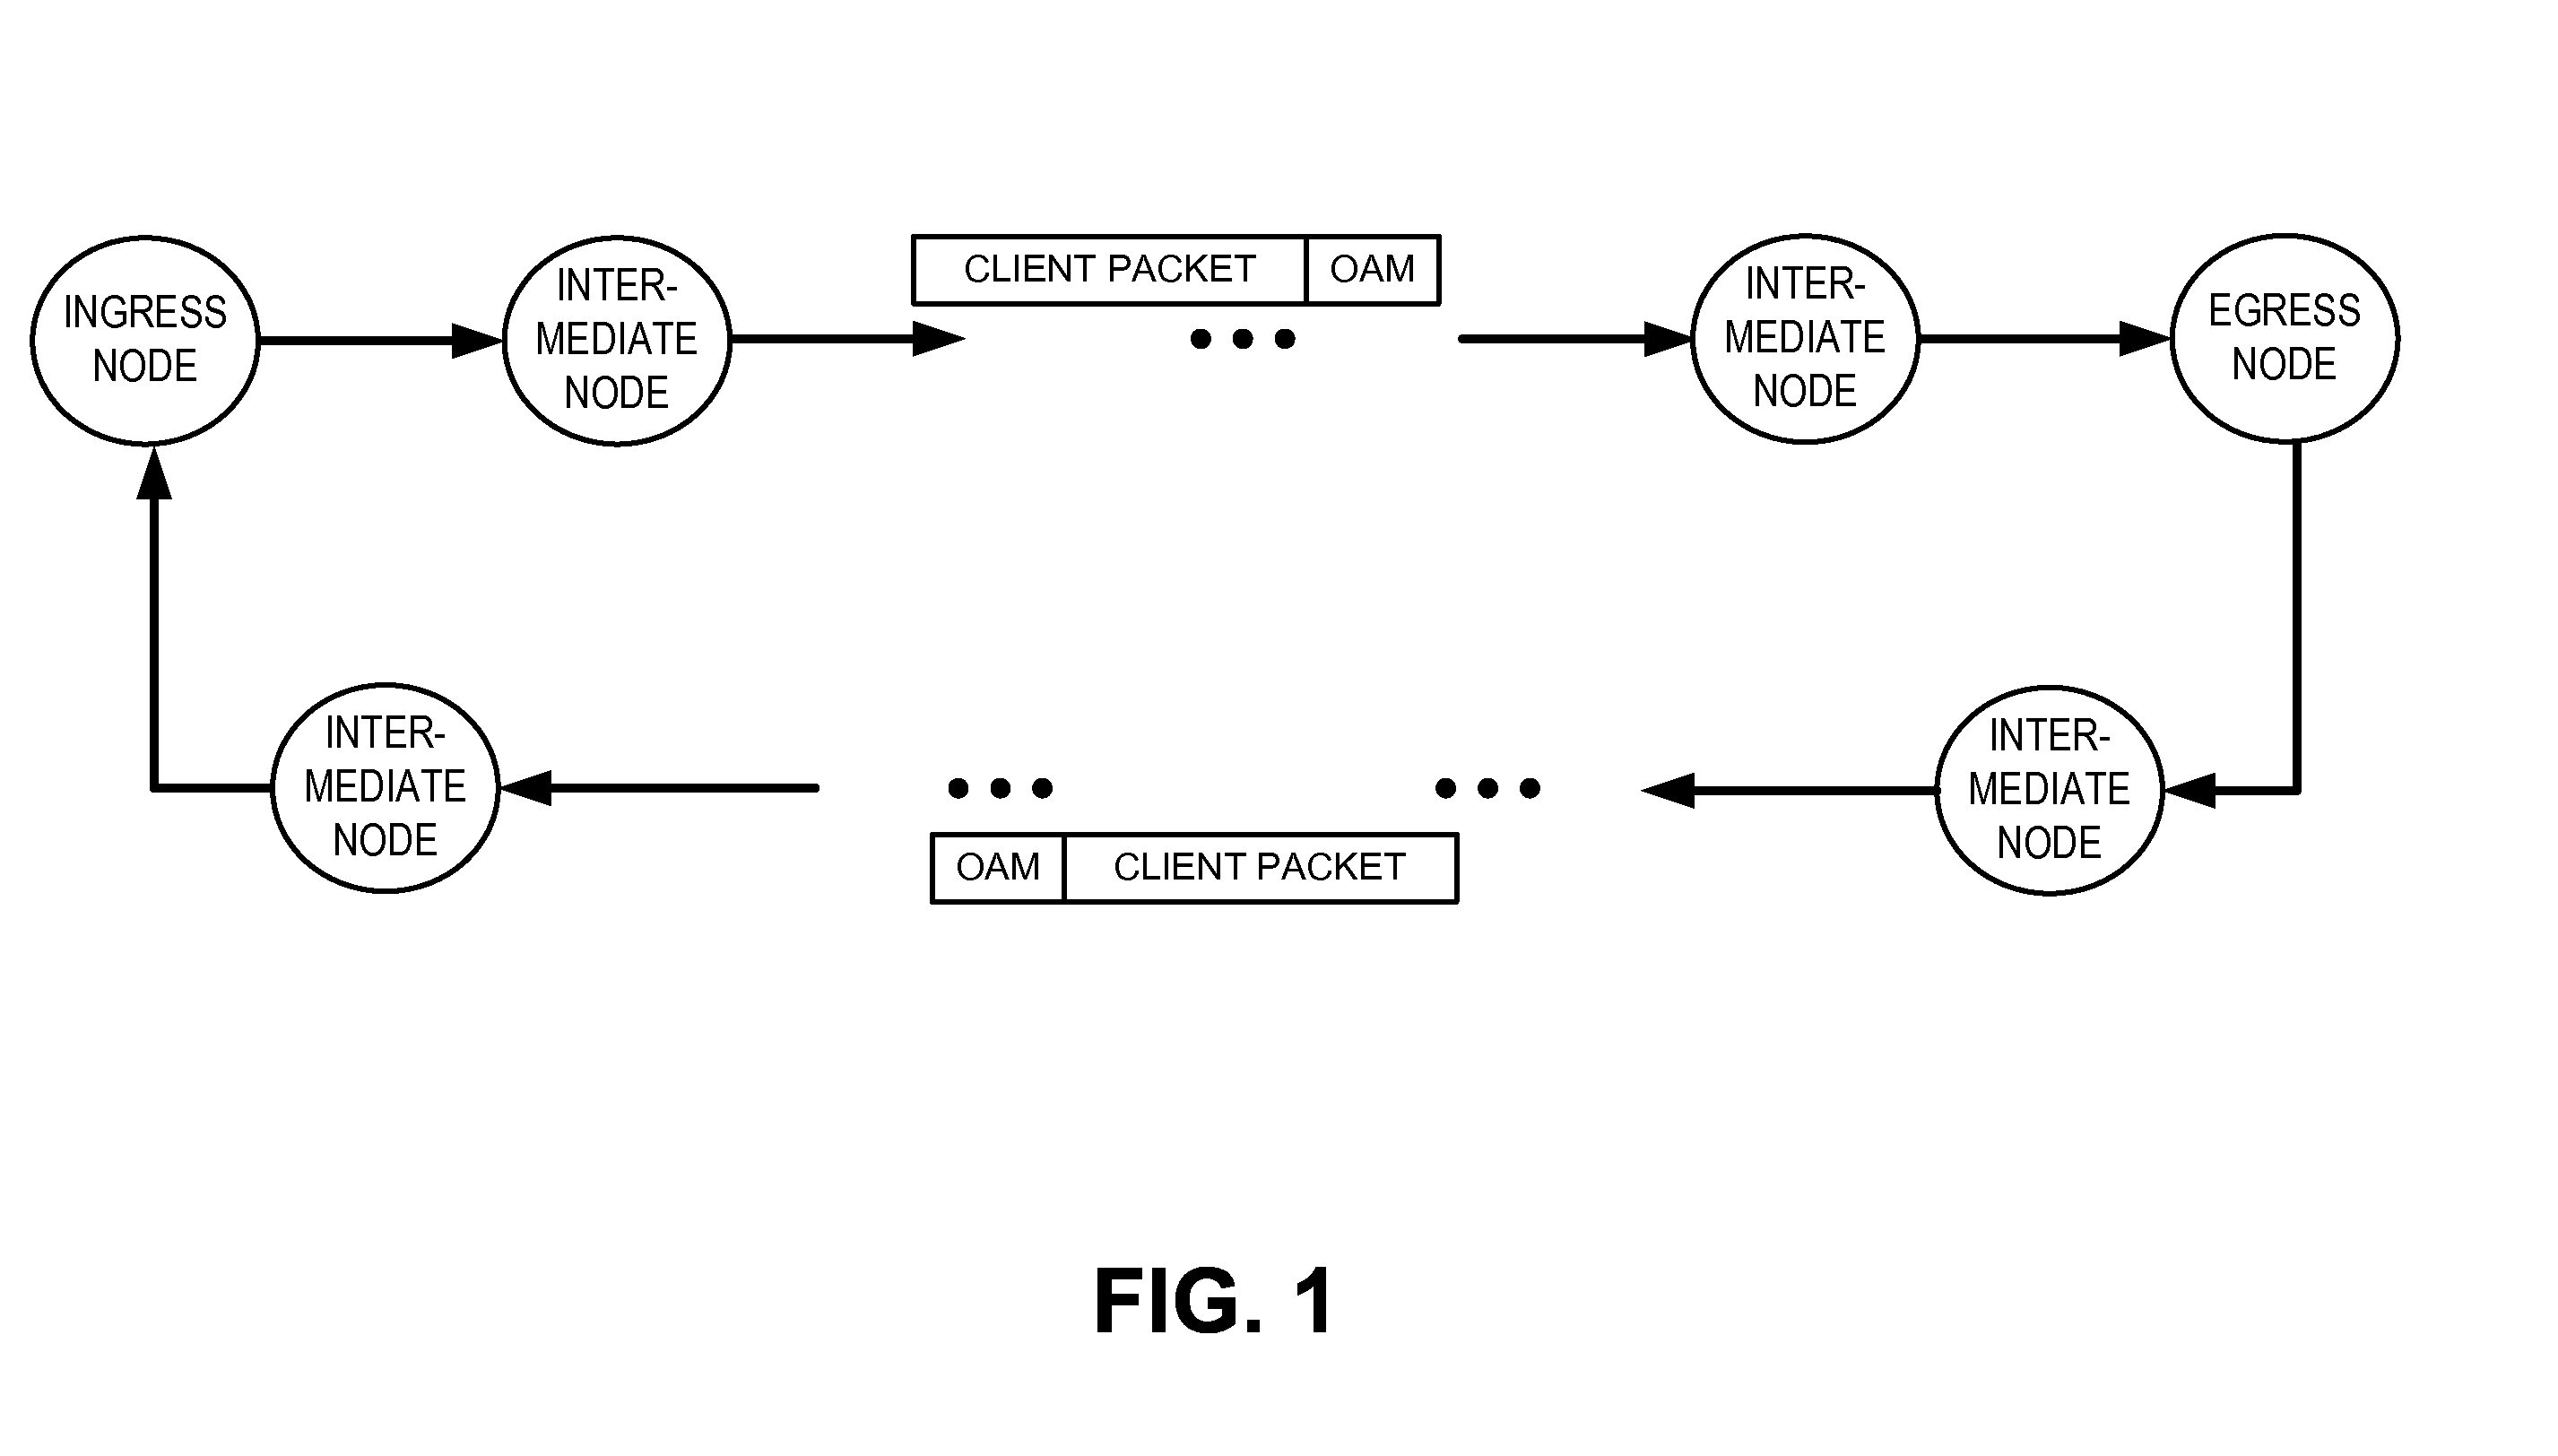 Operations, administration, and management fields for packet transport